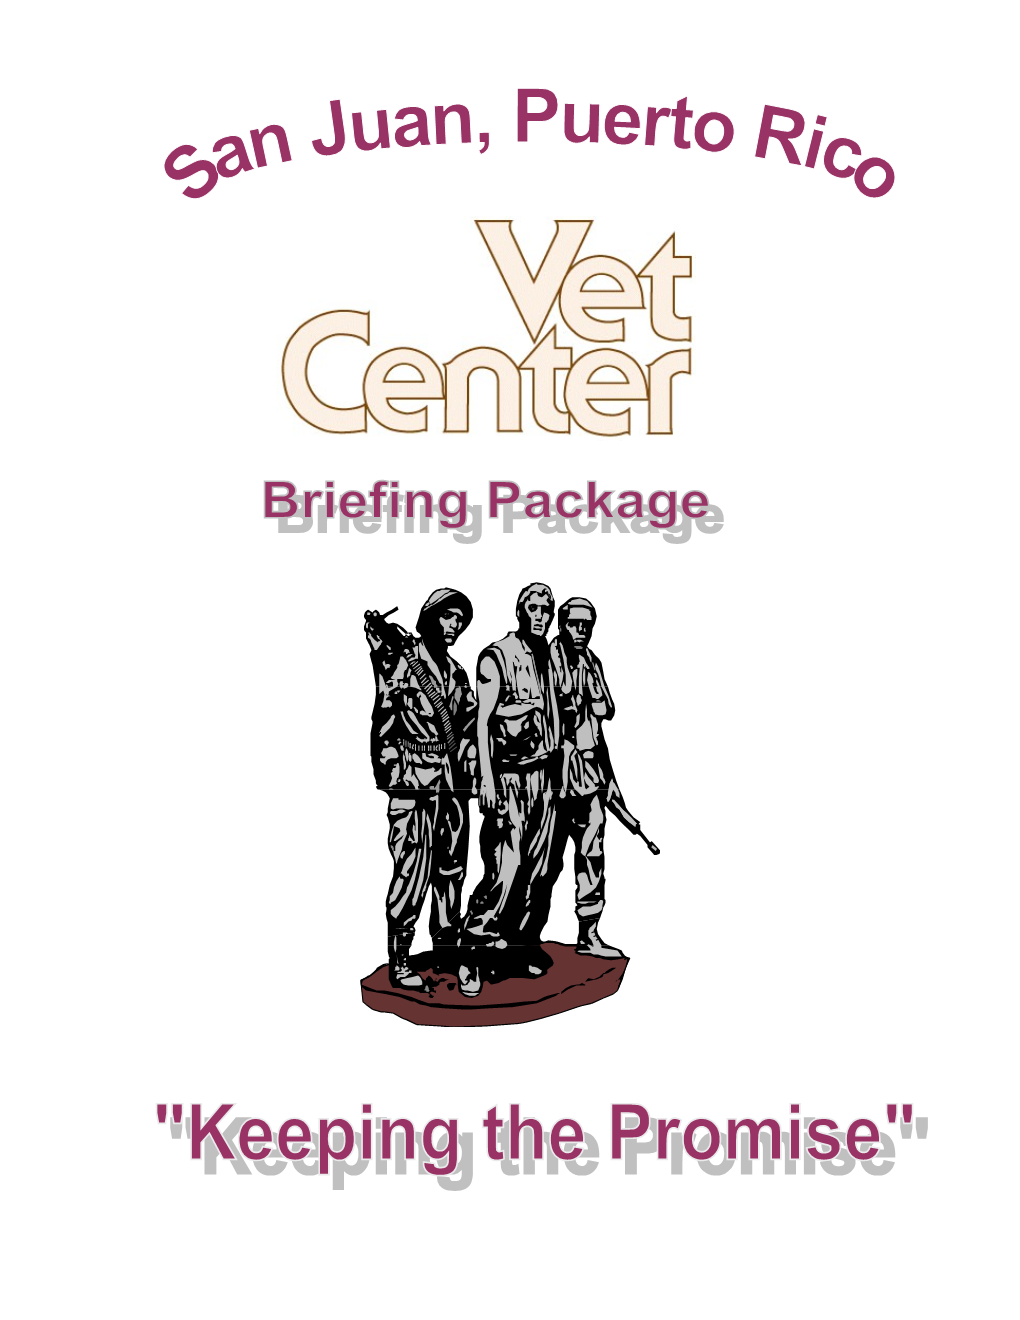 Vet Centers Serve Veterans and Their Families by Providing a Continuum of Quality Care